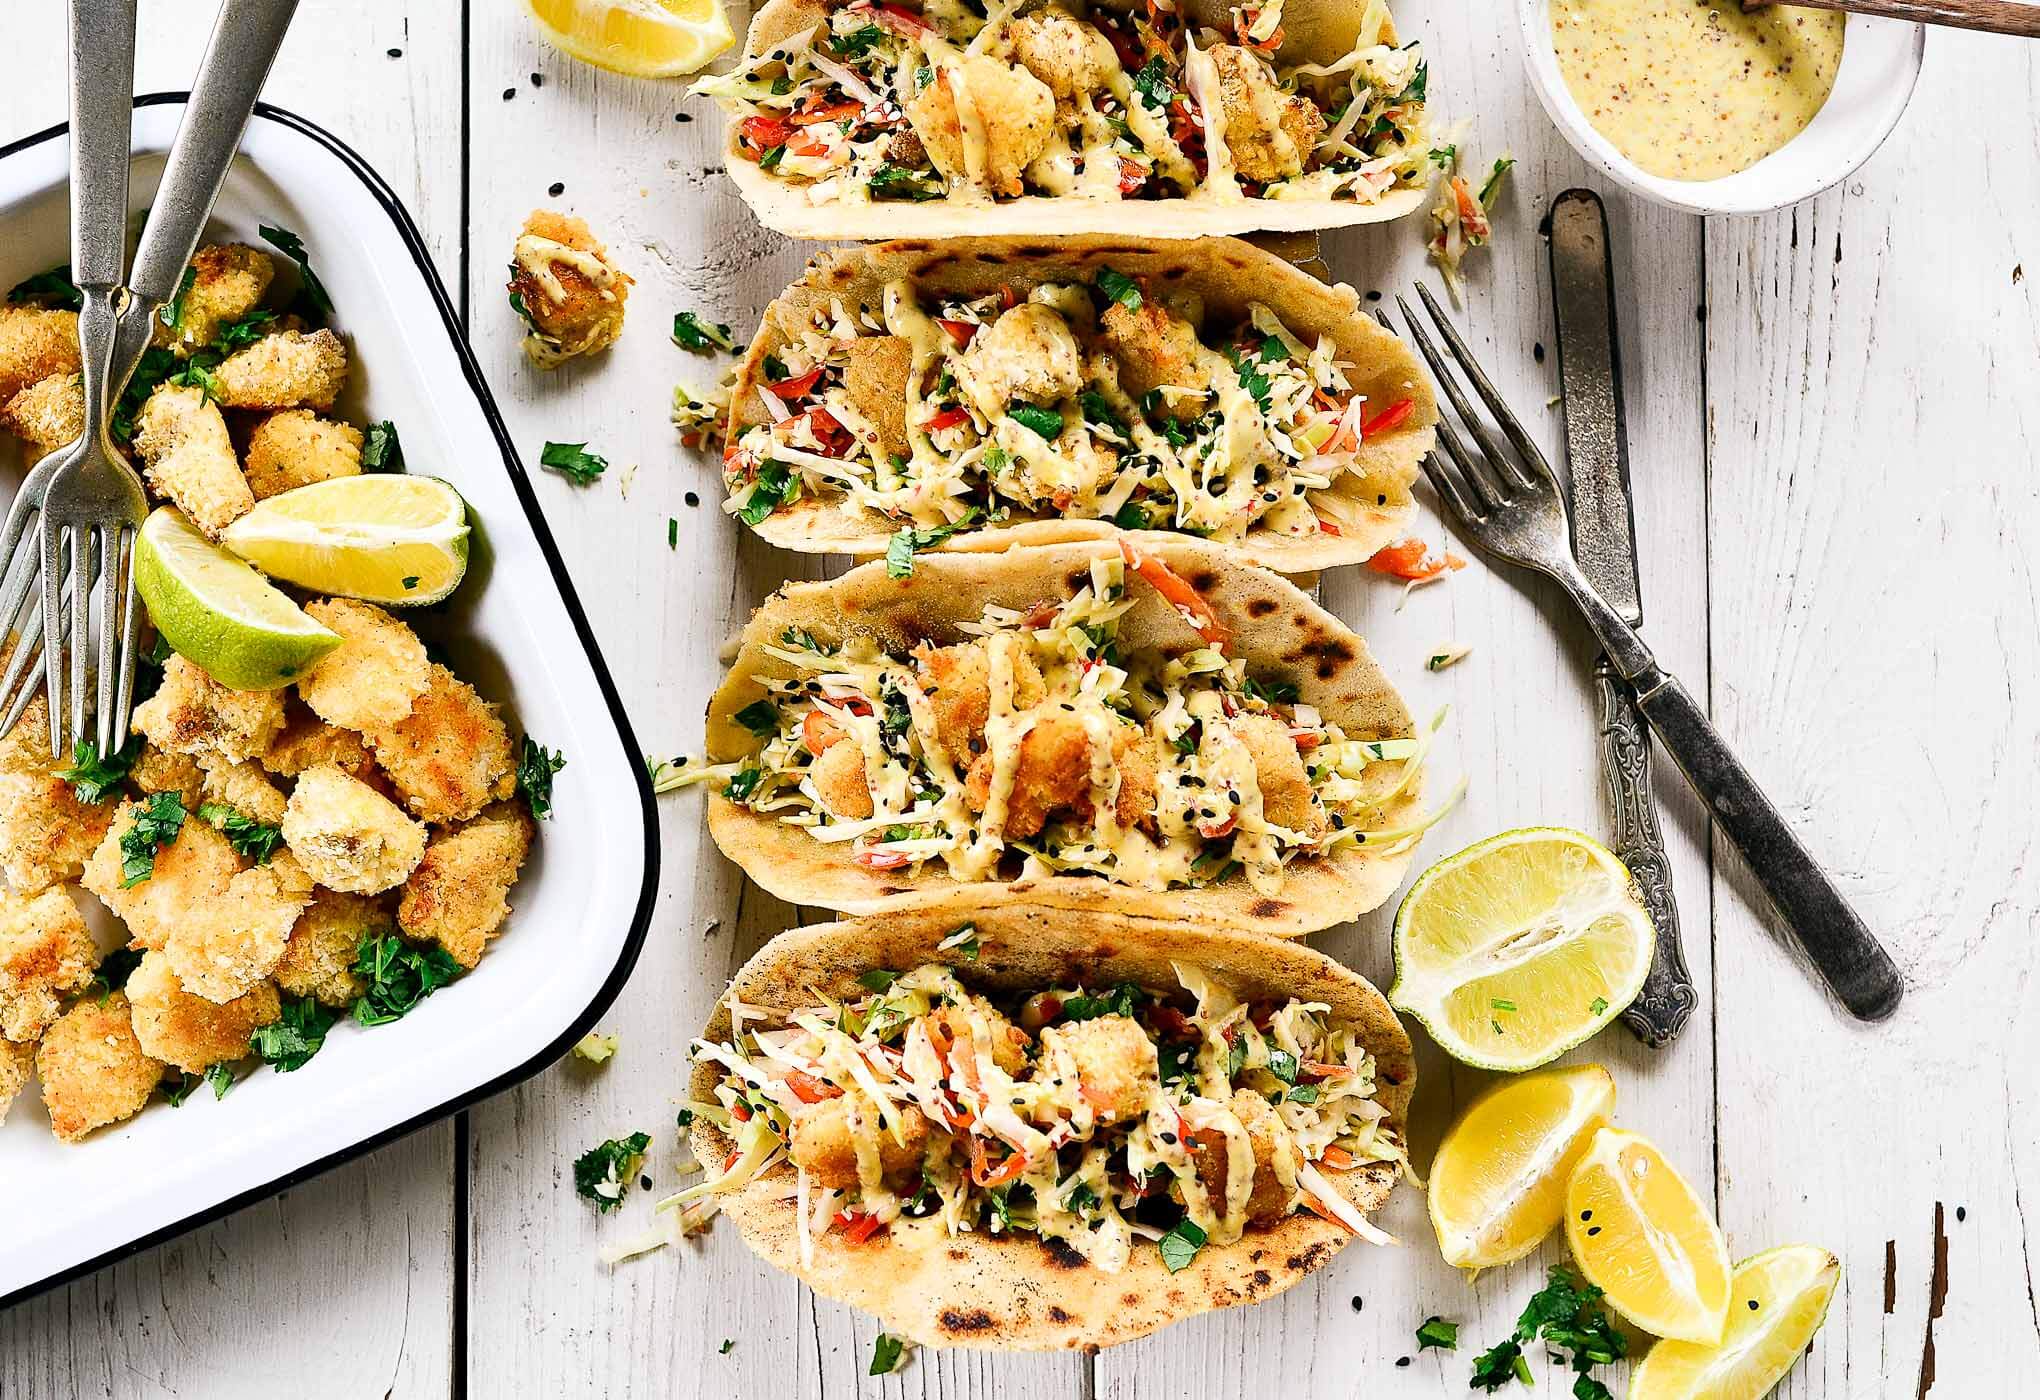 Easy and delicious paleo tacos! Crispy baked coconut crusted fish tacos- stuffed with melt in your mouth slaw and golden honey mustard sauce! A light, easy, paleo, and gluten free summer meal. Easy paleo dinner recipes. paleo recipes. paleo lunch. paleo meal planning. paleo meal prep. Healthy paleo meals. Healthy lunch recipes. Easy paleo recipes. Easy paleo dinner recipes. Healthy paleo lunch recipes. best fish taco recipe. paleo fish tacos. gluten free dairy free fish tacos.